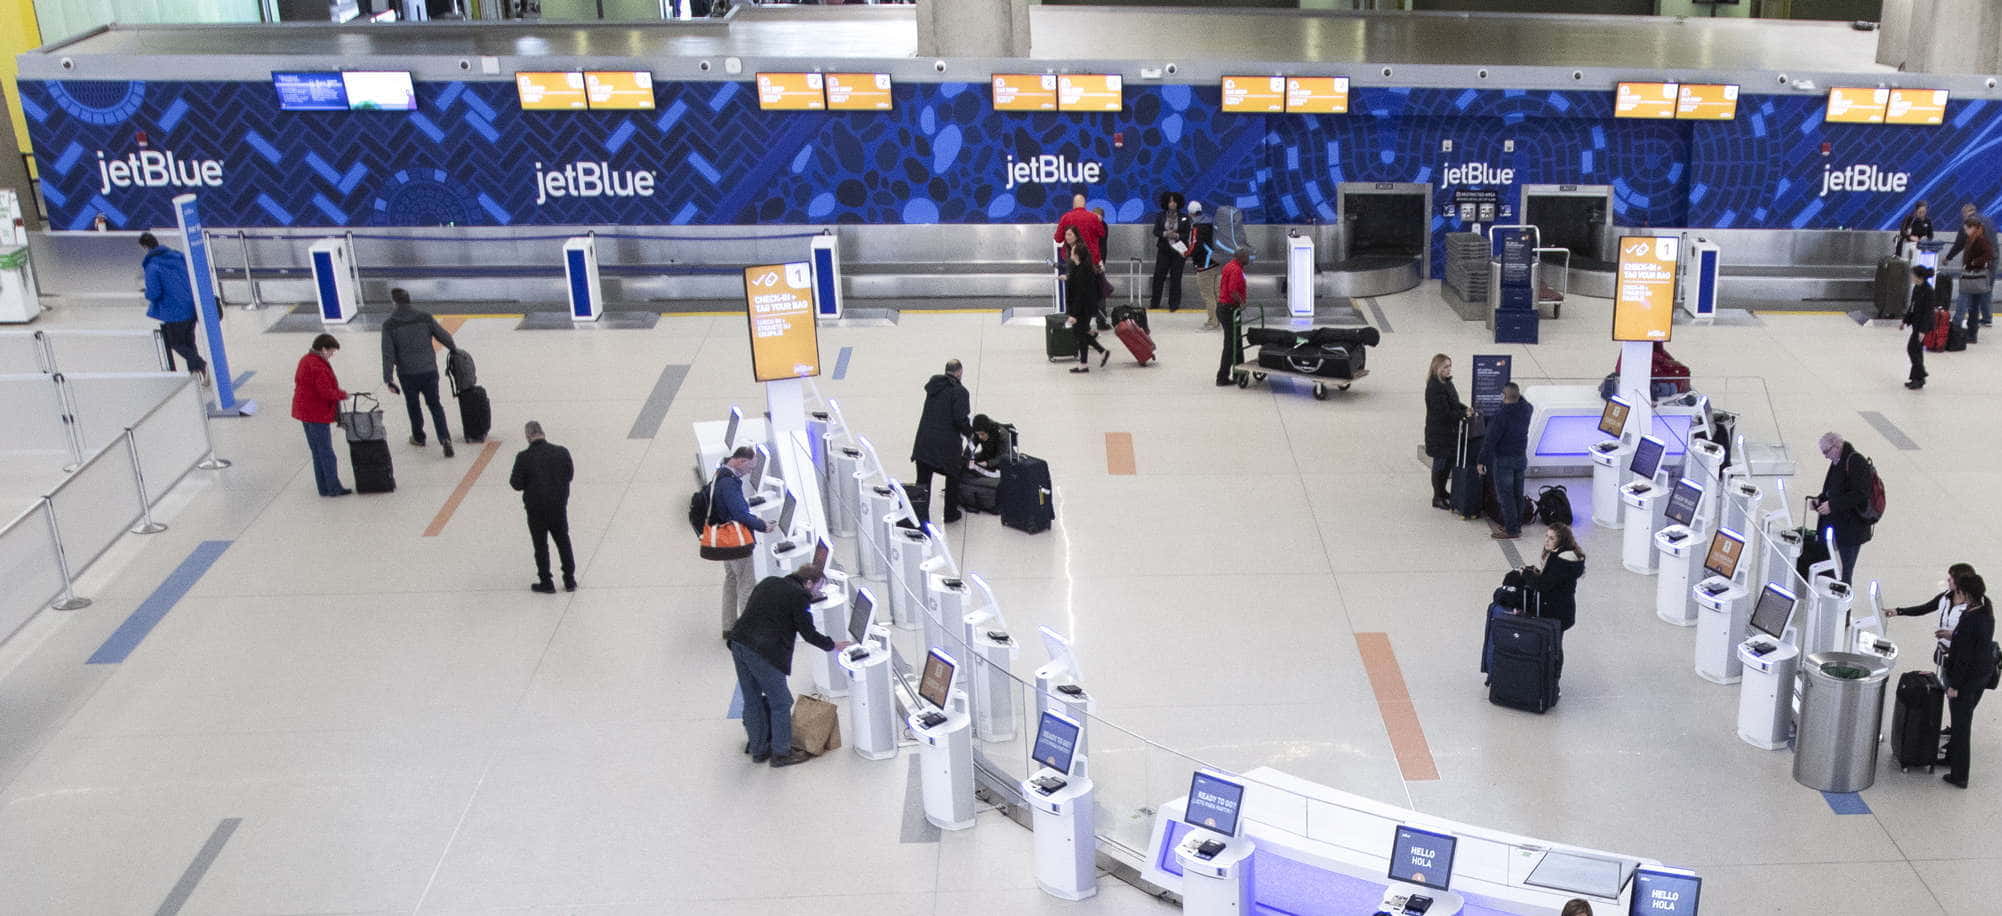 People checking baggage and getting boarding passes at airport.